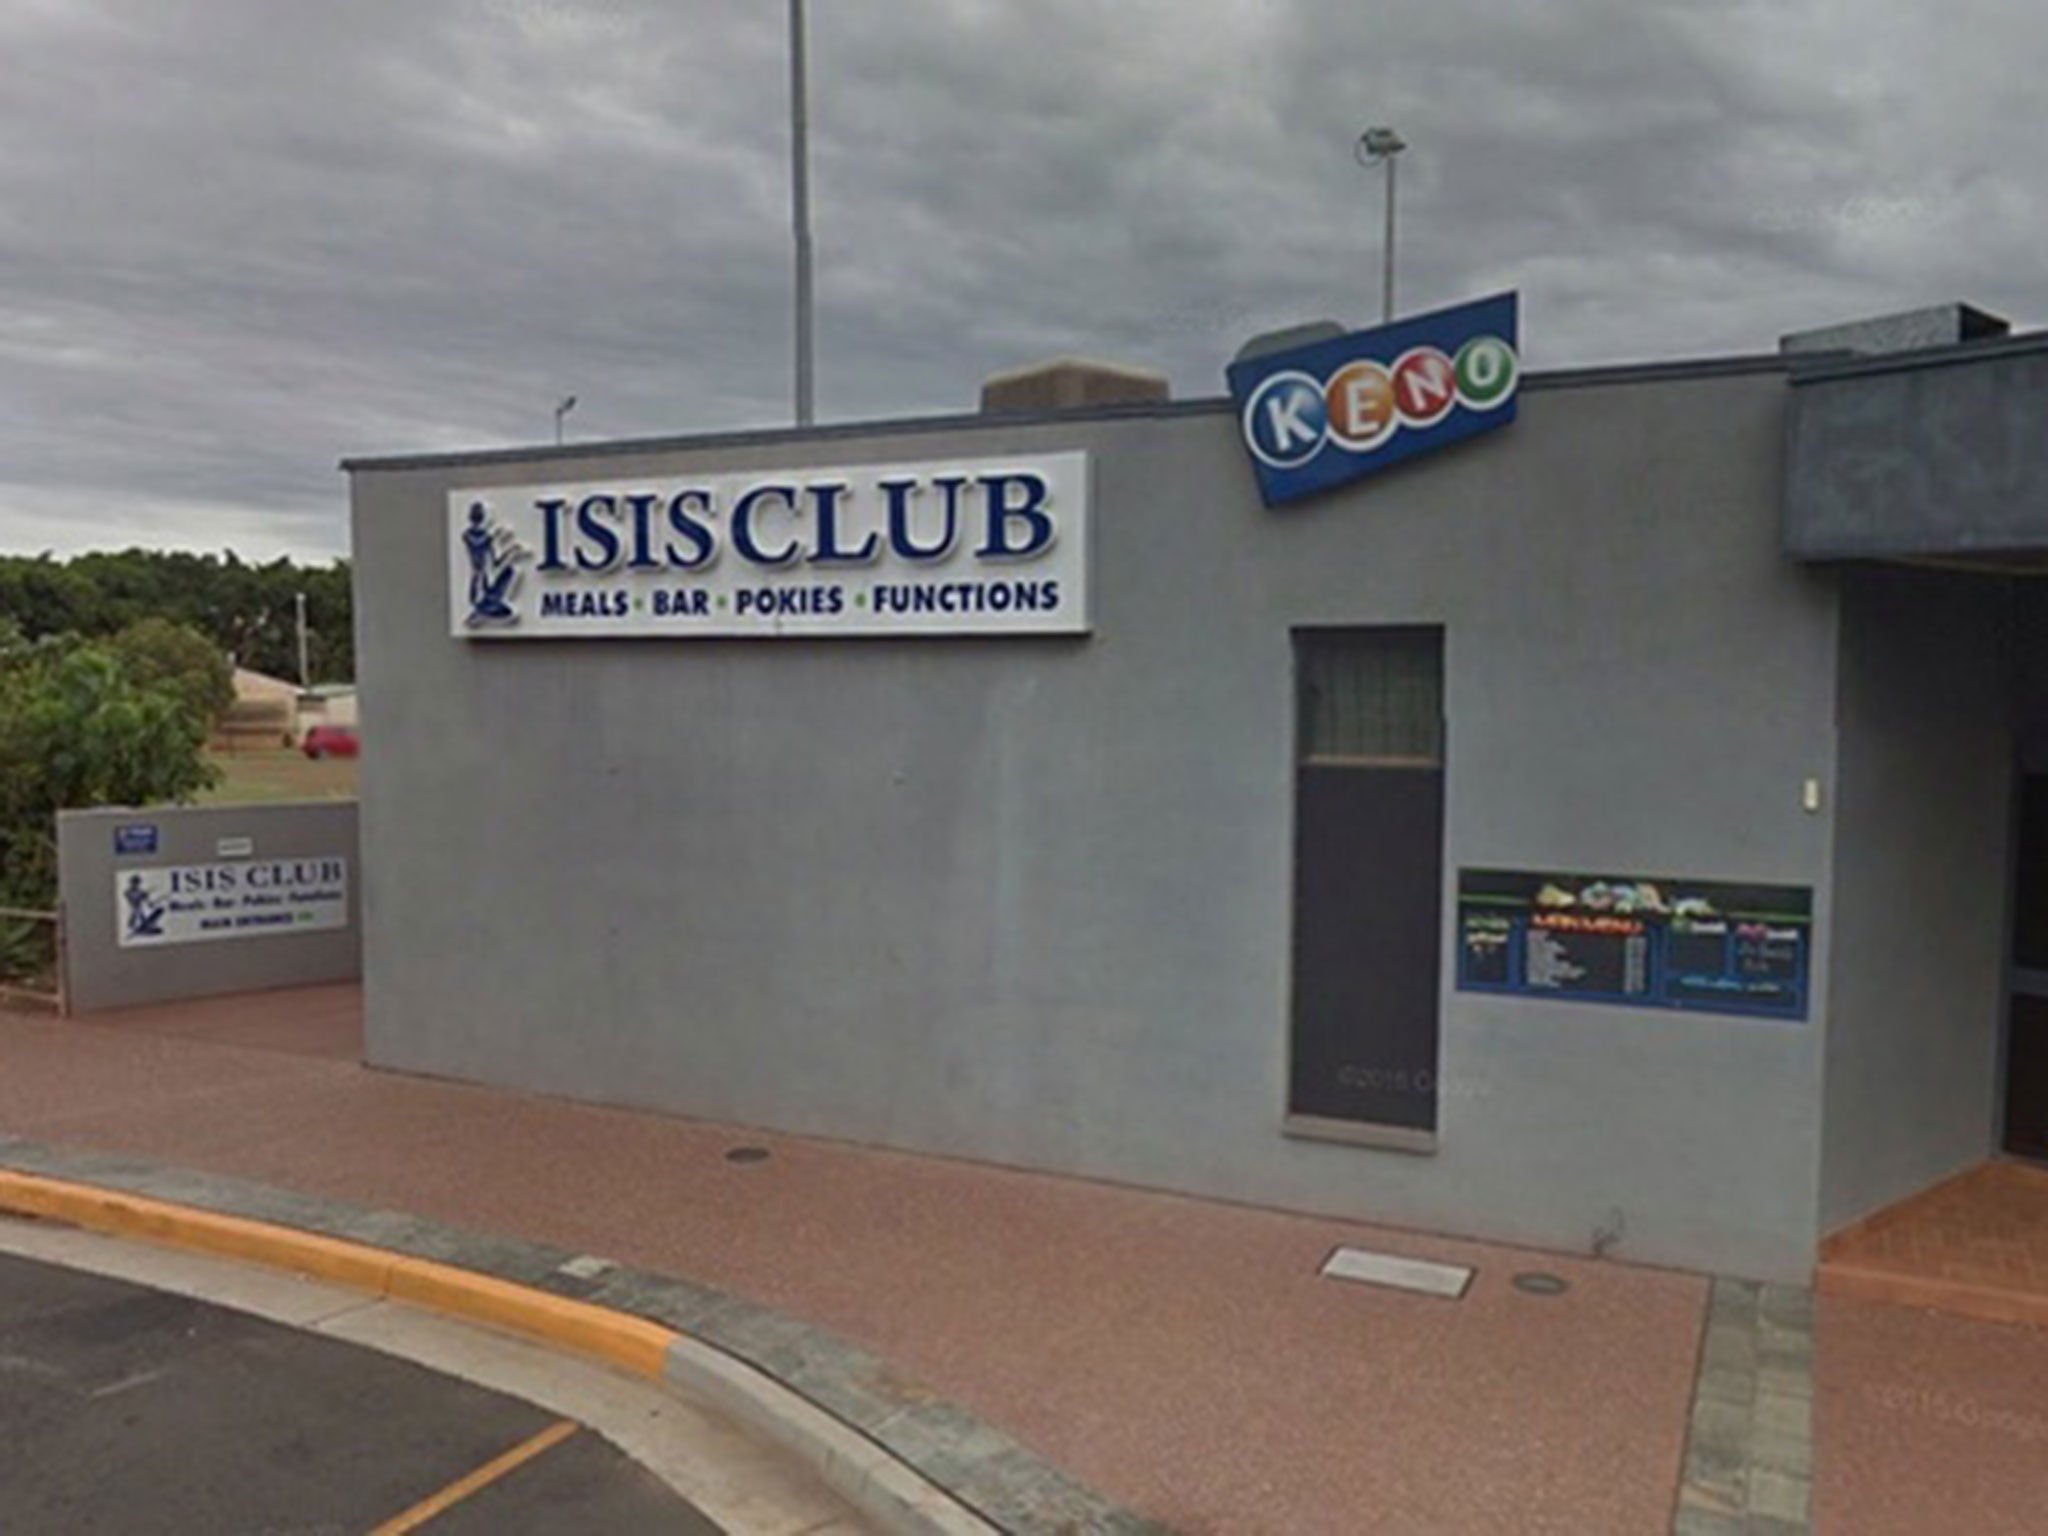 The Isis Club in the Australian district of Isis, located near Bundaberg